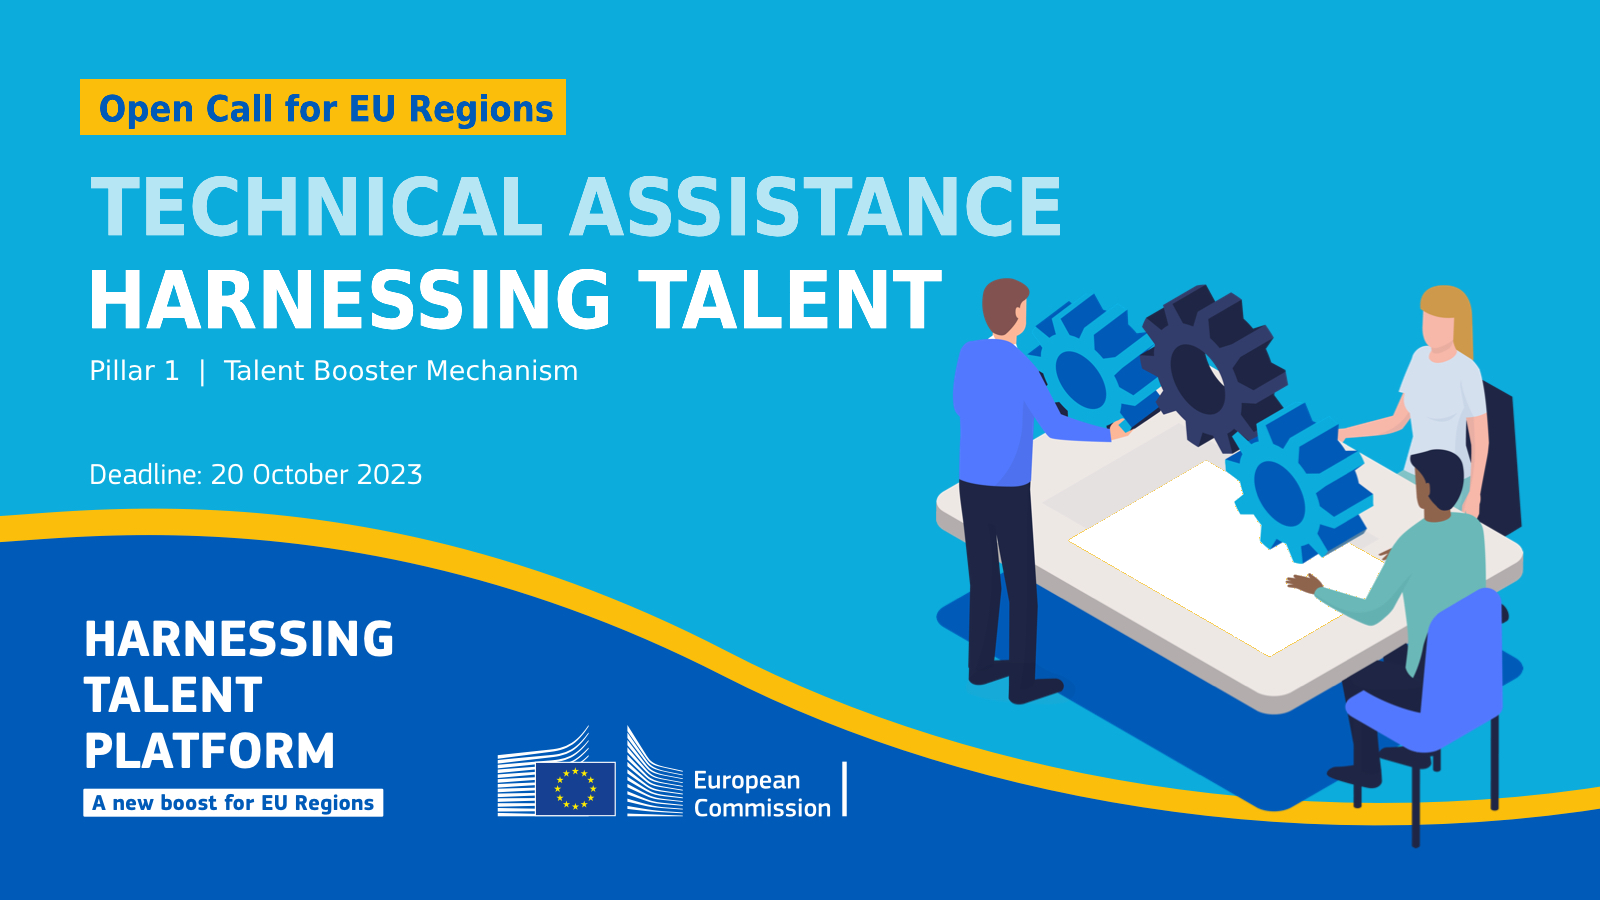 Harnessing Talent in Europe: Commission will offer selected EU regions technical assistance to help them attract and develop talent